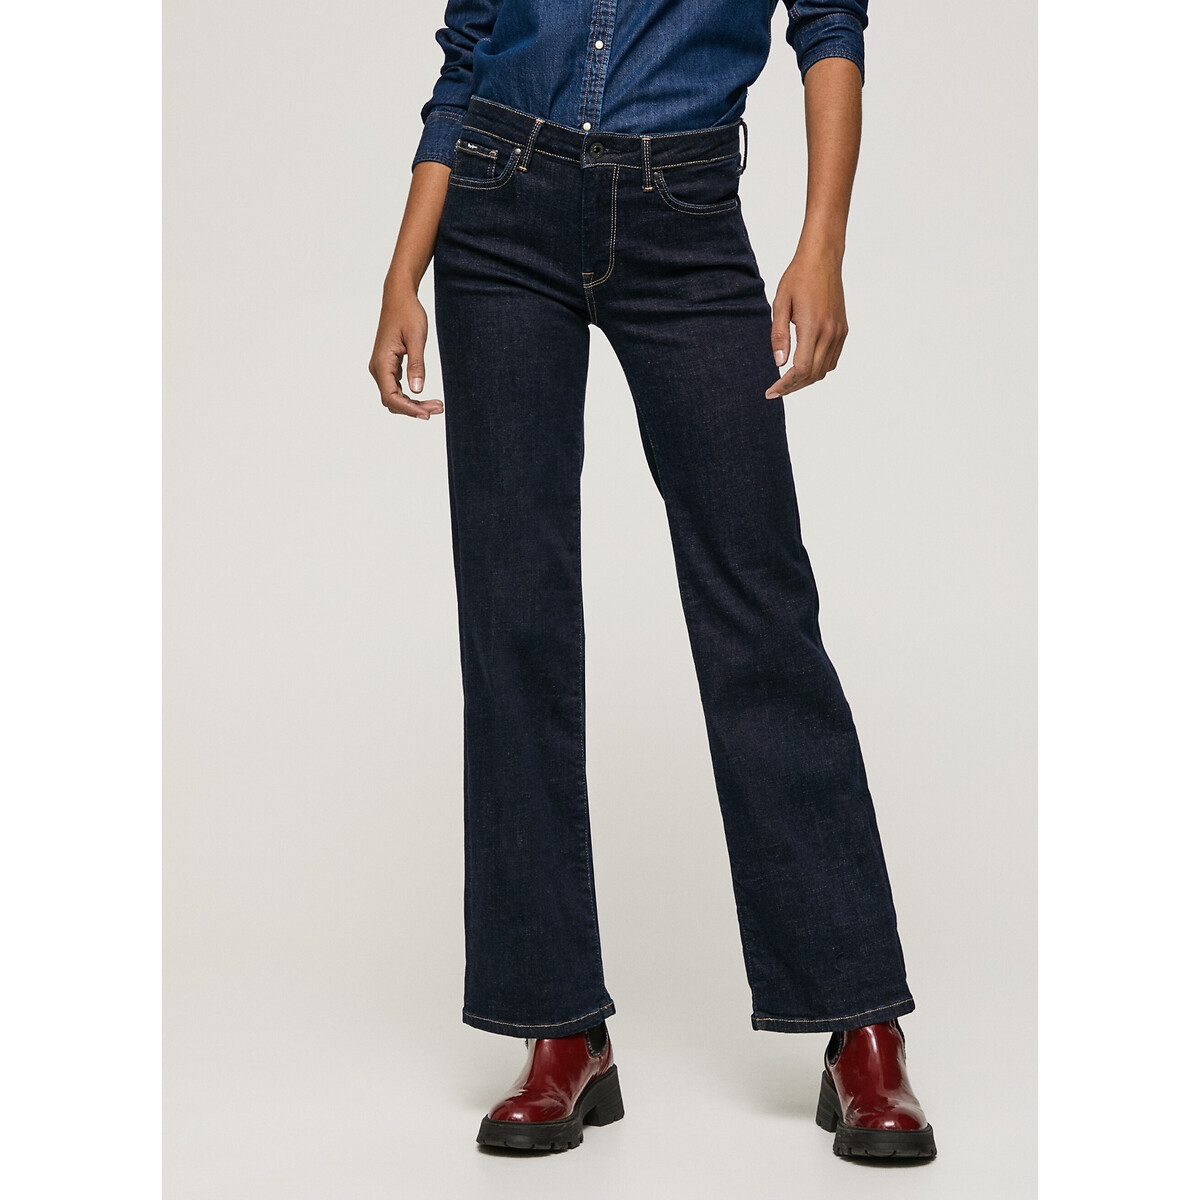 Pepe Jeans Aubrey Flared Jeans in Mid Rise | Rather Saucy